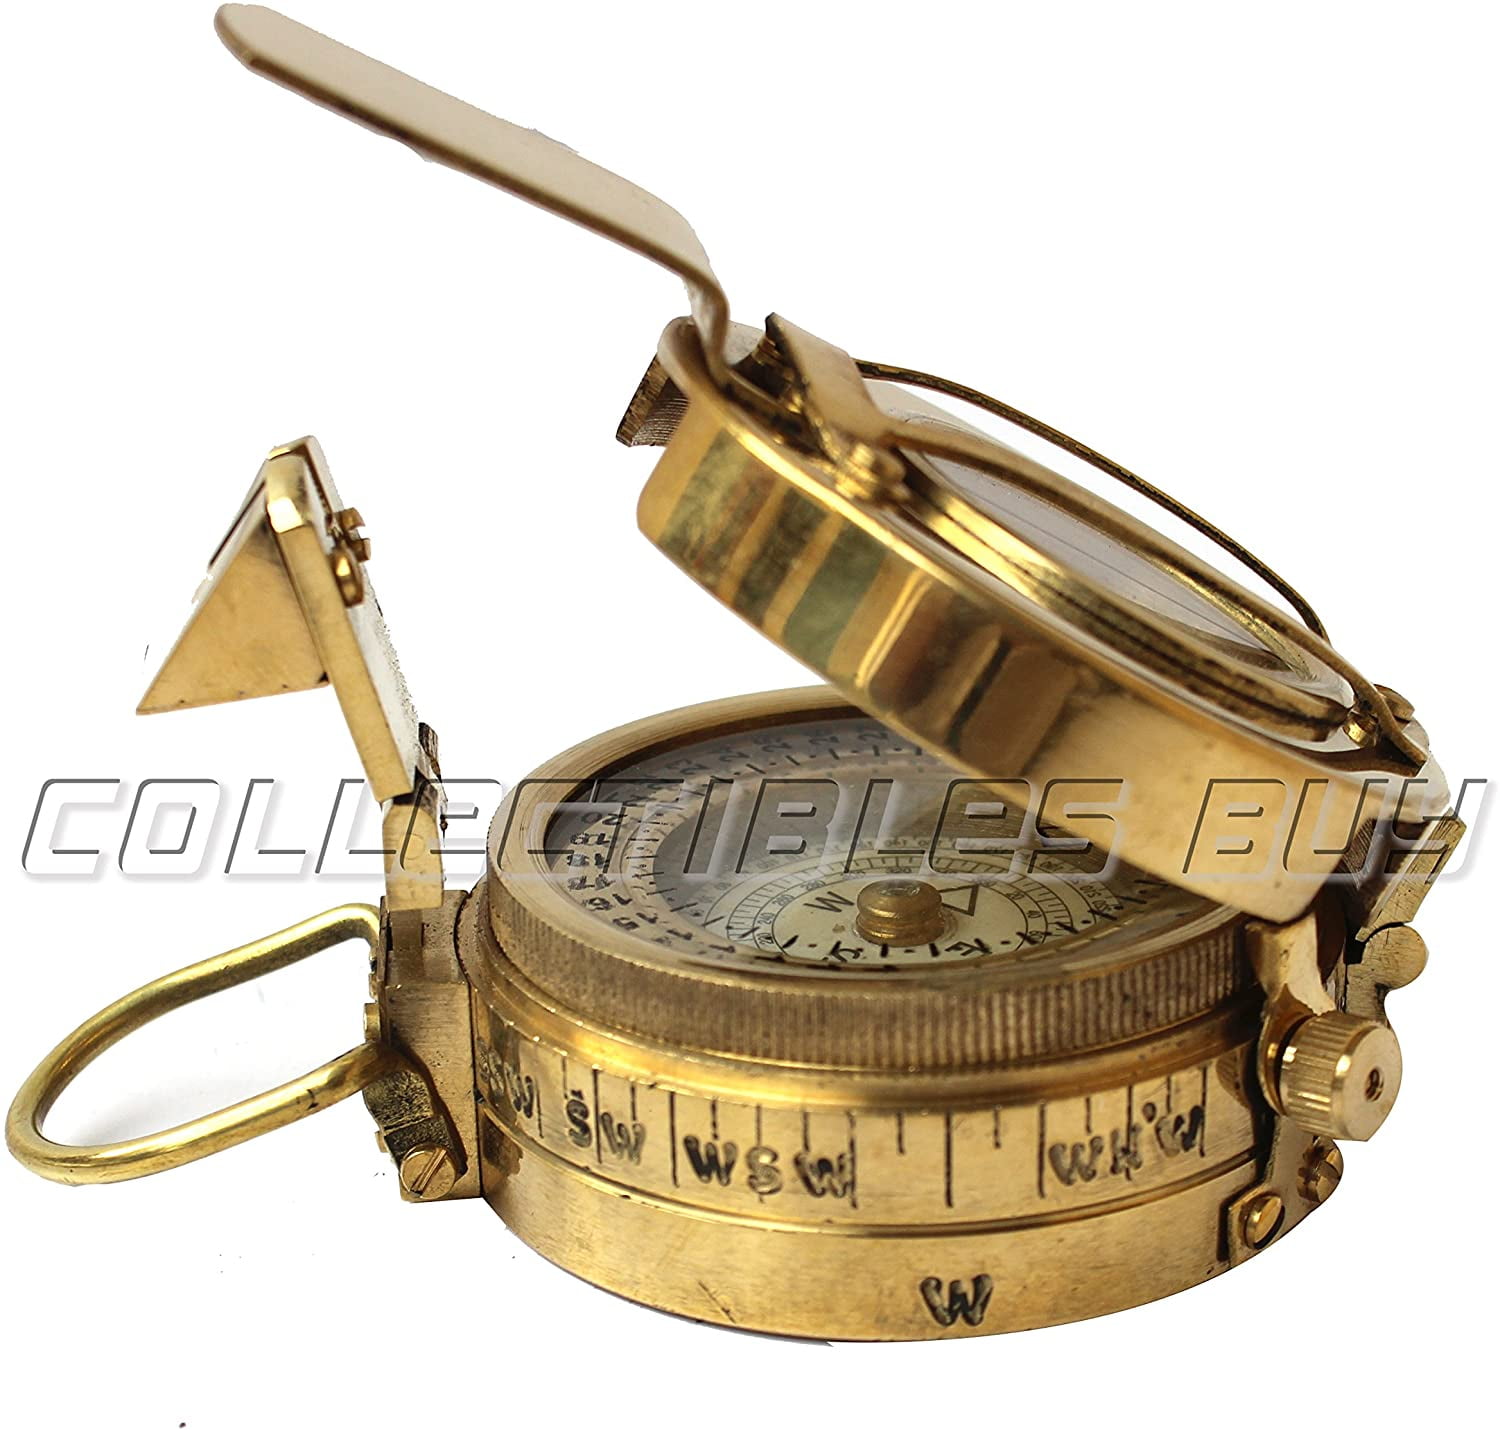 Antique Nautical Military Compass Vintage Shinny Brass Finish Maritime Compass 